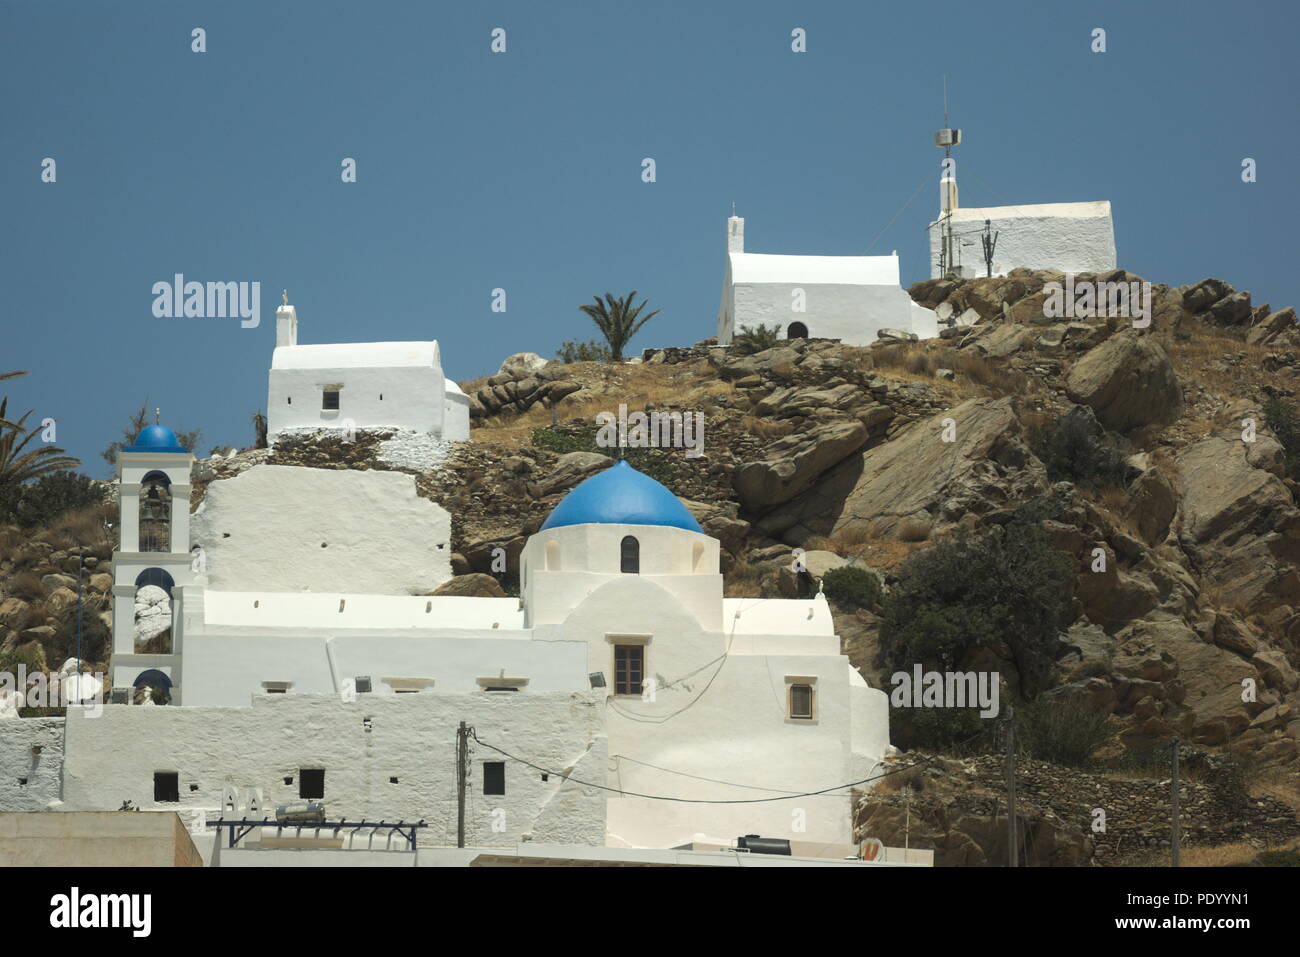 Europe, Greece, the island of Ios in the Cyclades, the hora (main town). Churches and chapels perched on the hillside above the town - village. Stock Photo